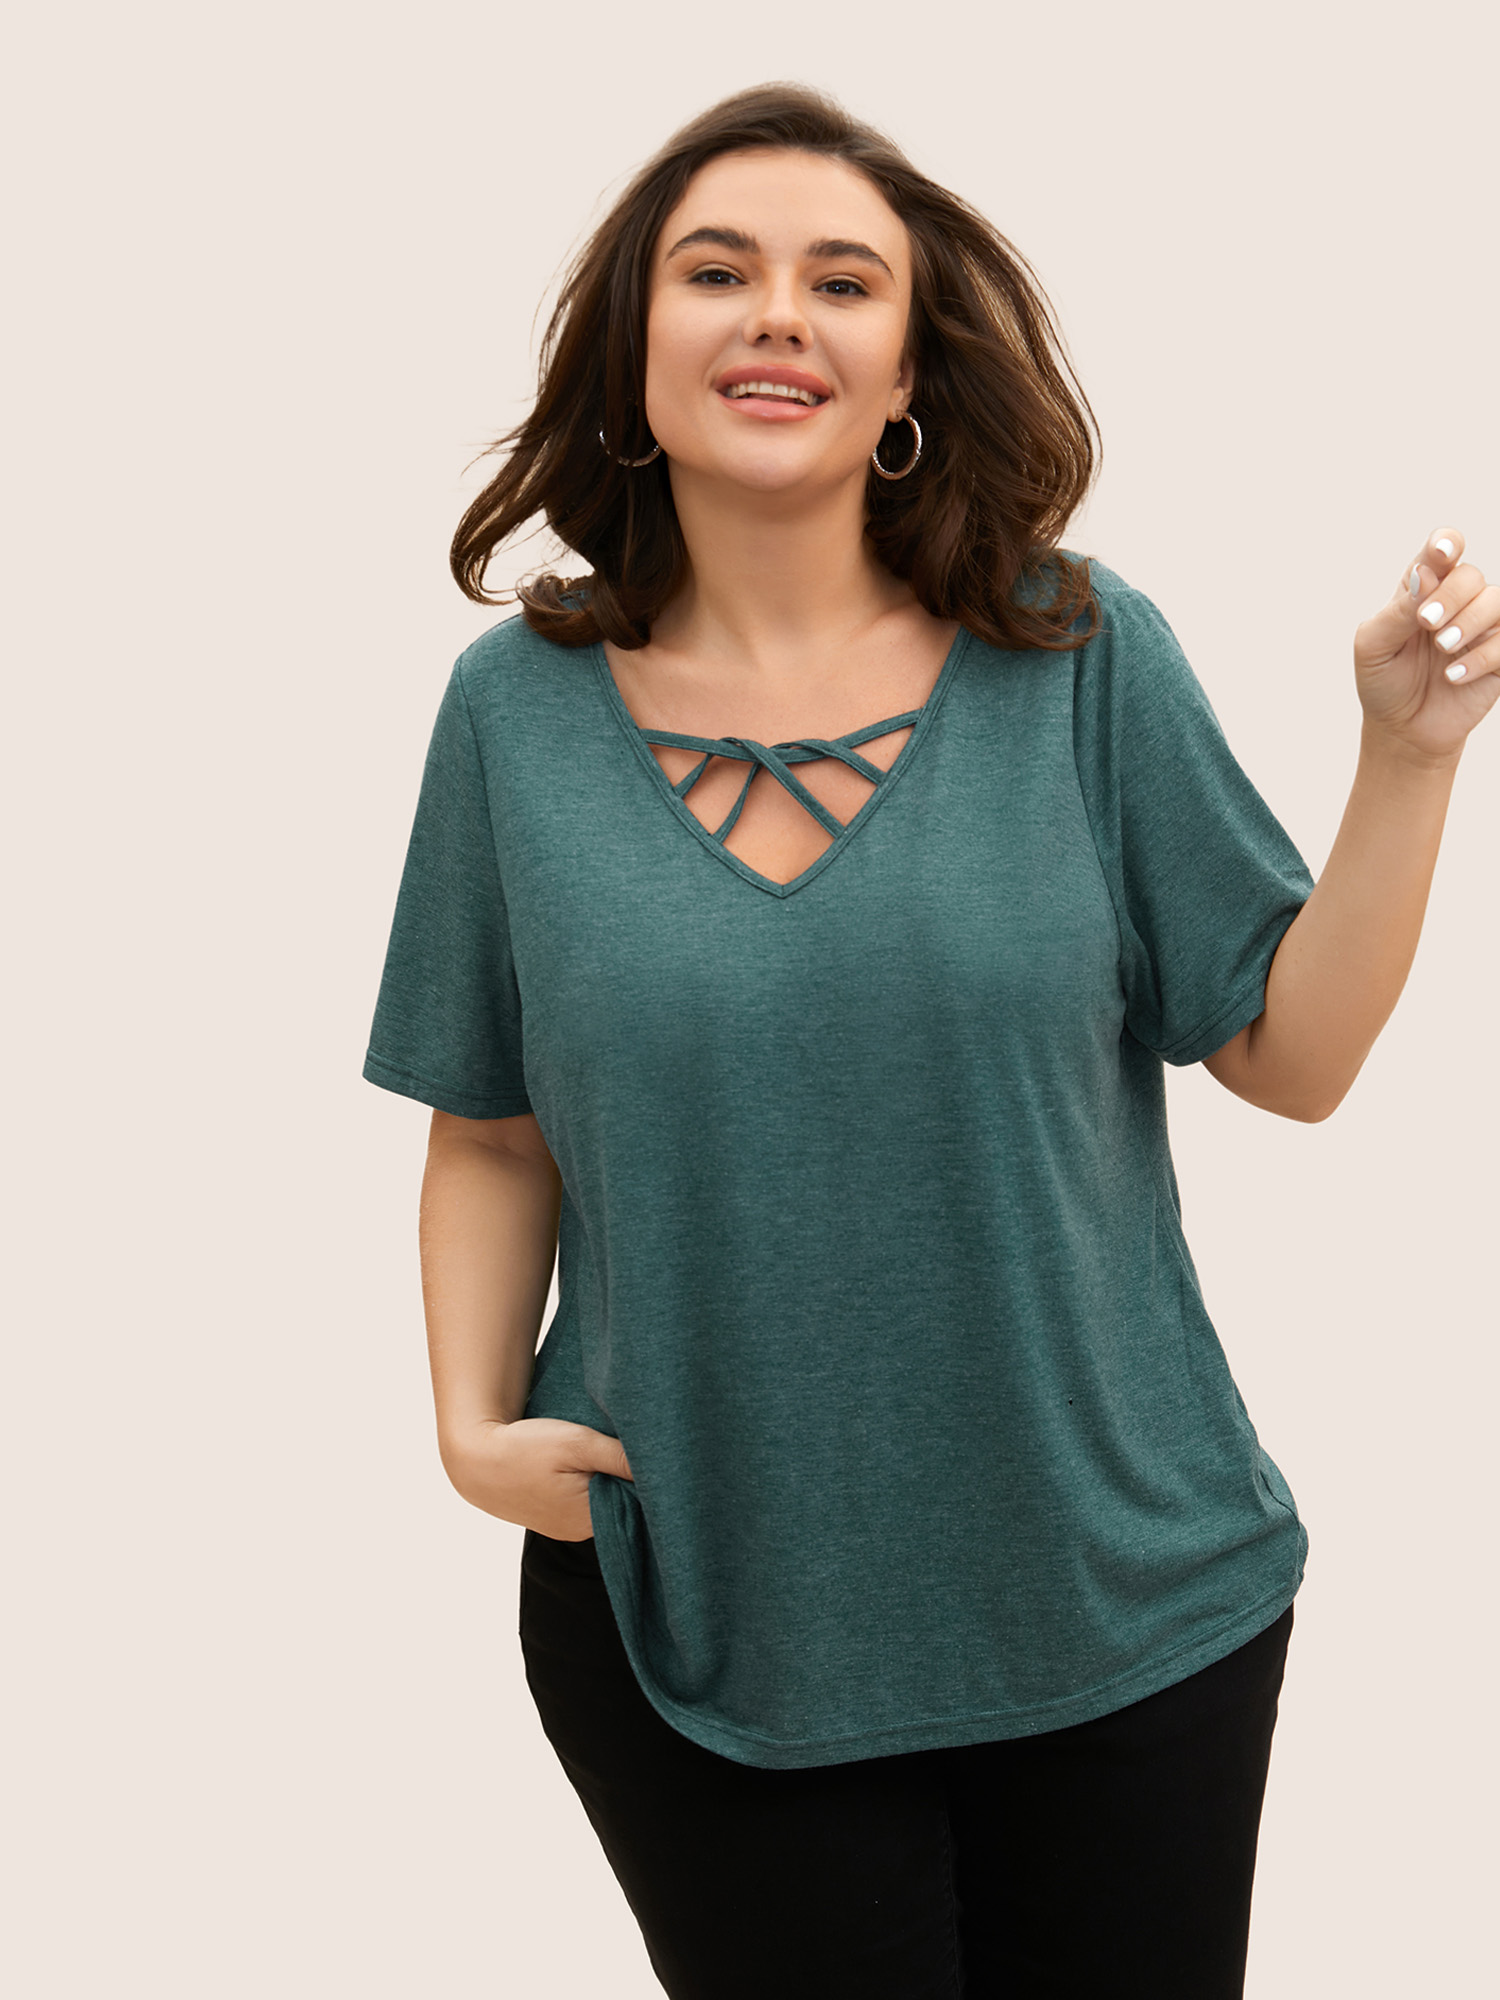 

Plus Size Solid Heather Crisscross Medium Stretch T-shirt DarkGreen Women Casual Cut-Out V-neck Everyday T-shirts BloomChic